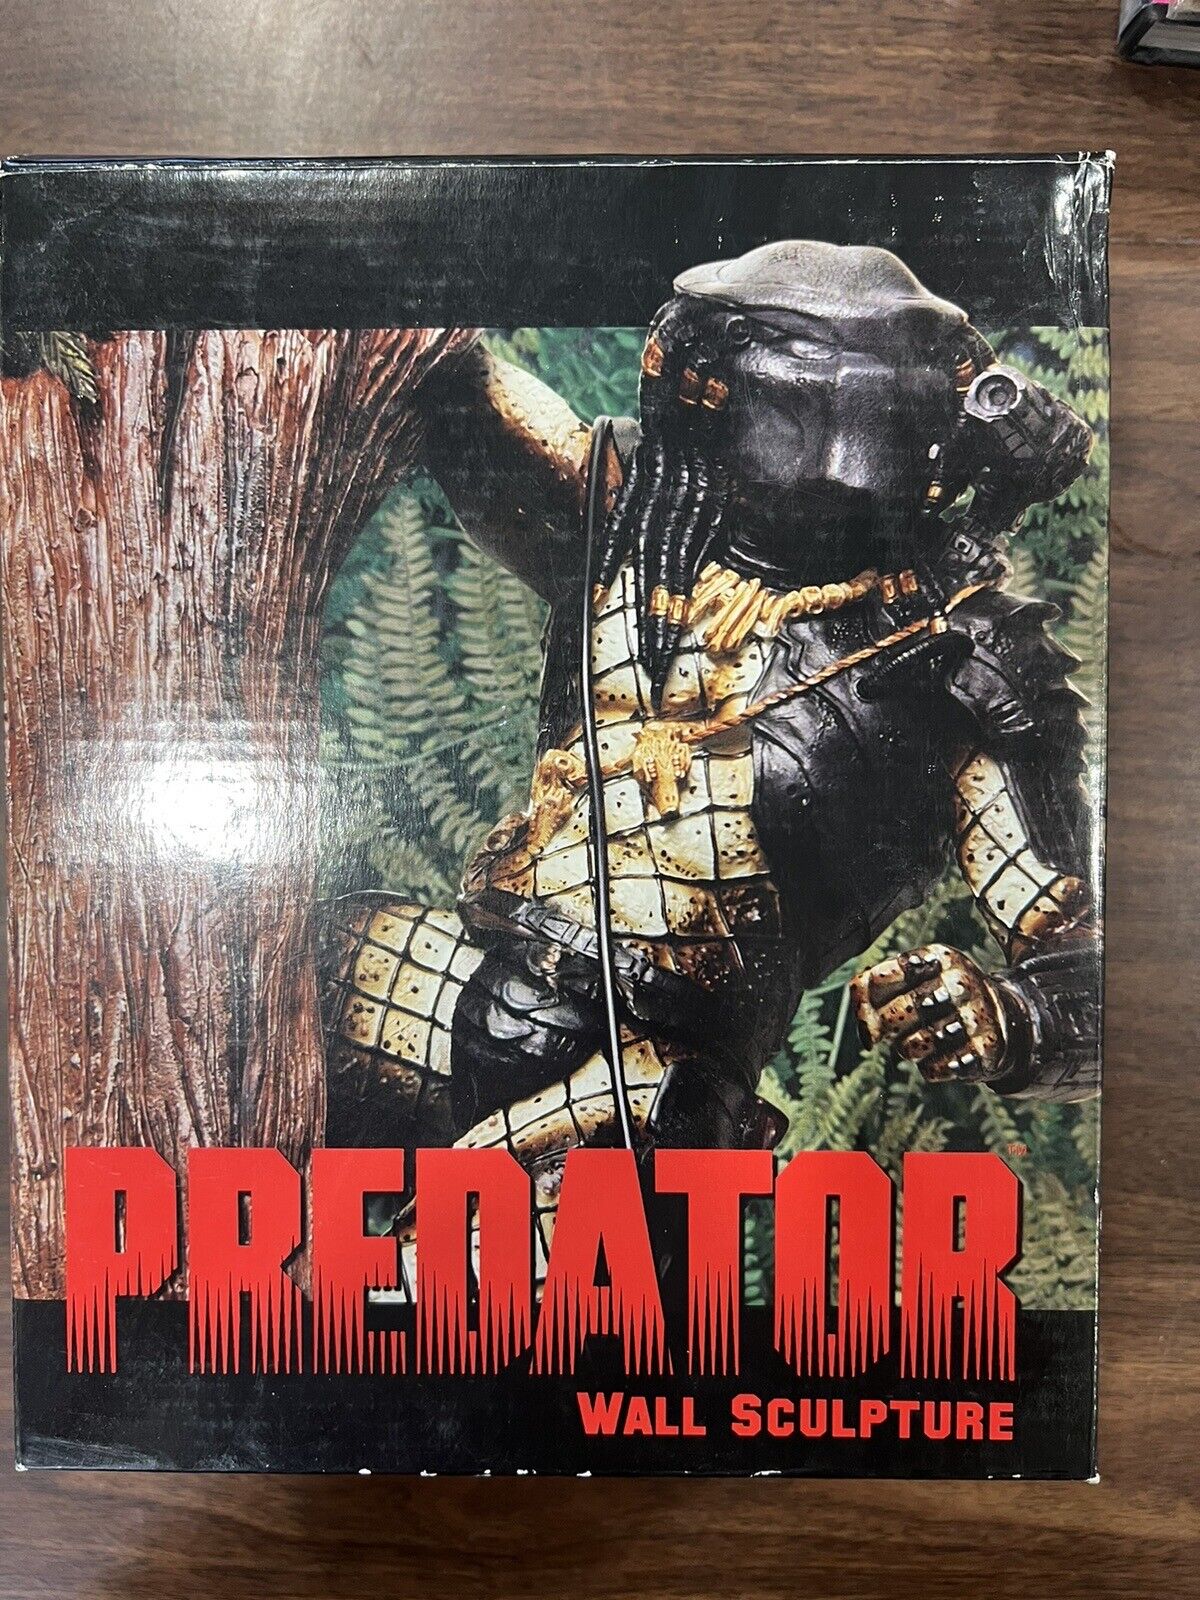 Predator Wall Sculpture By Diamond Select Toys Limited To 2000 Pieces Wi Box Coa